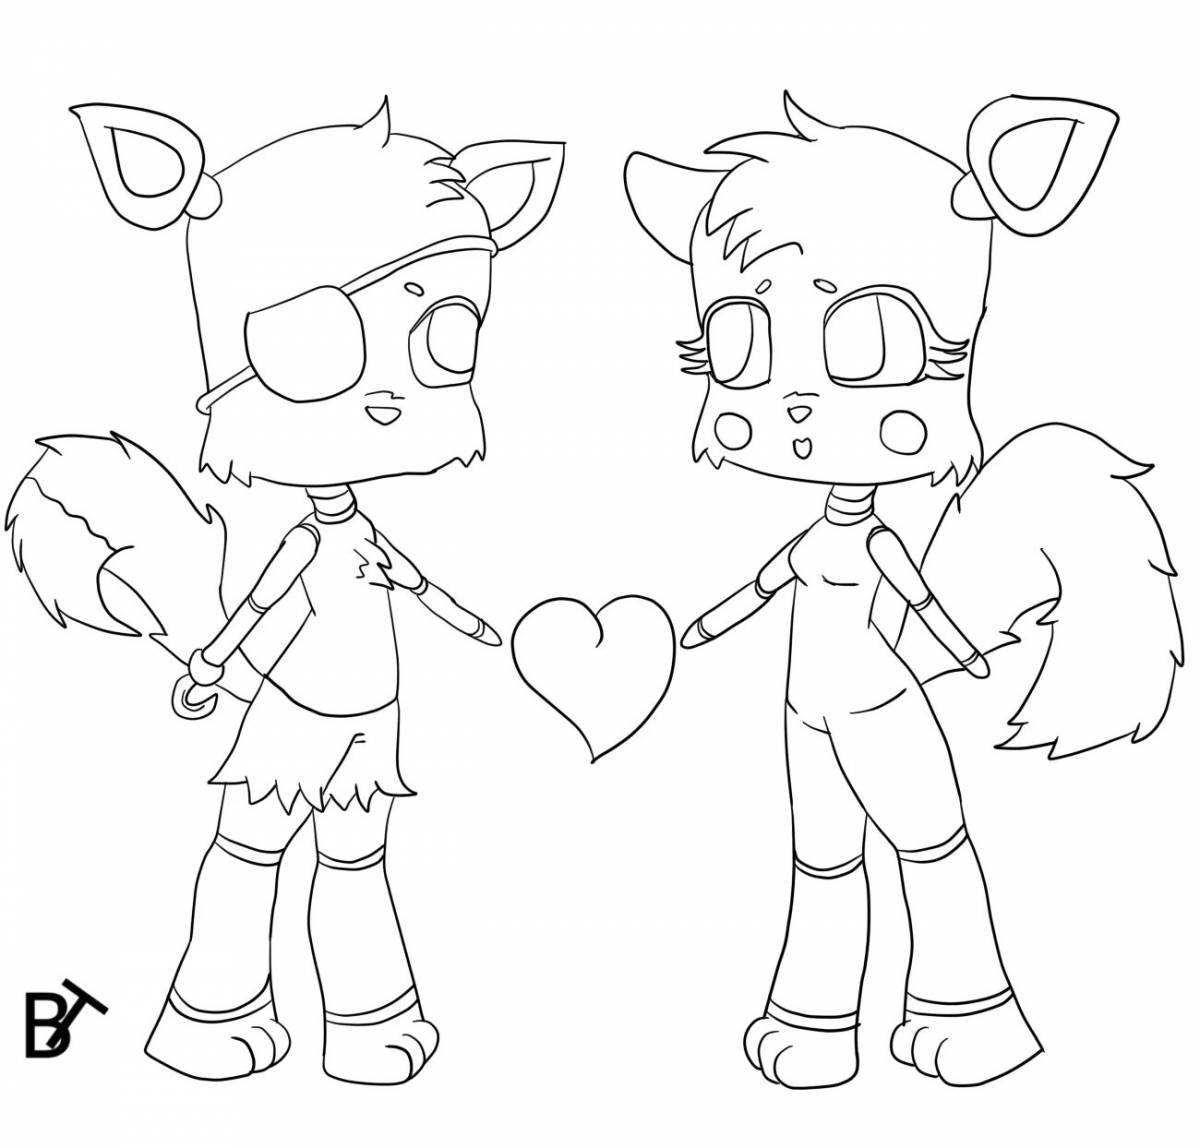 Radiant mangle and foxy coloring